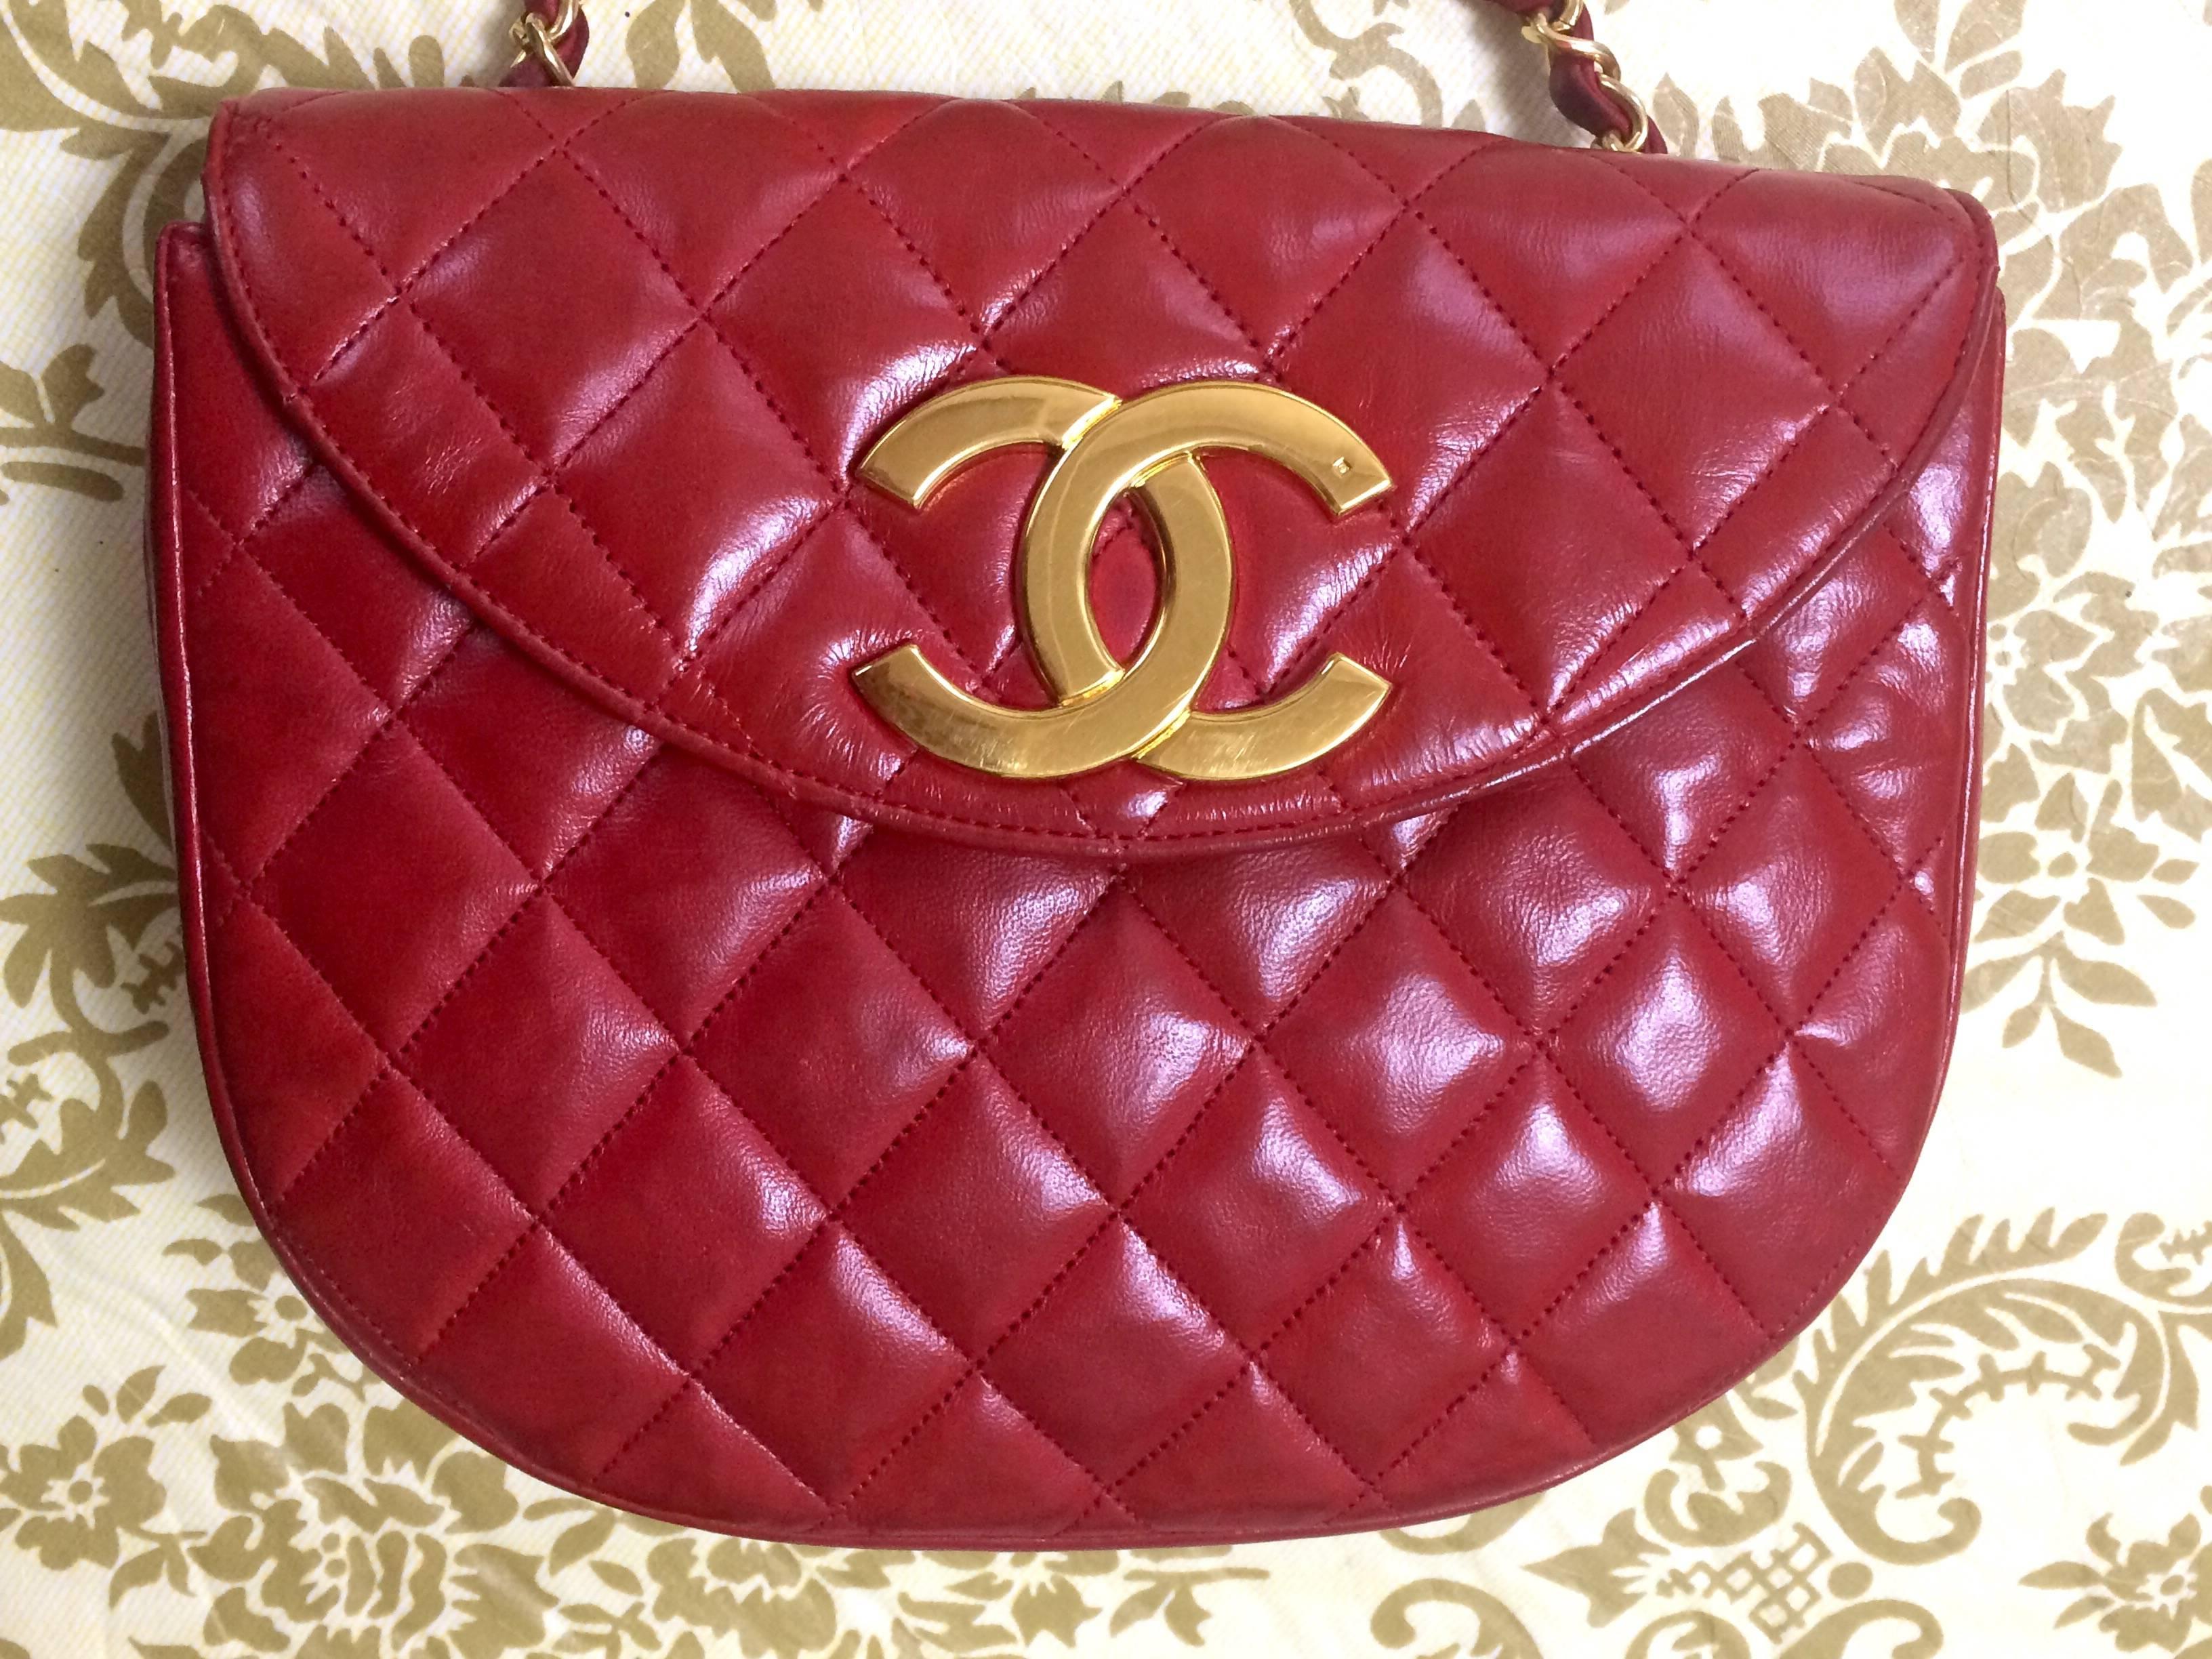 1980s. Vintage CHANEL rare red lambskin oval flap 2.55 shoulder bag with golden large CC motif and chain straps. Masterpiece.

Don’t miss!
Introducing another hard-to-find vintage treasury bag from Chanel back in the 80's.
Still in a good vintage